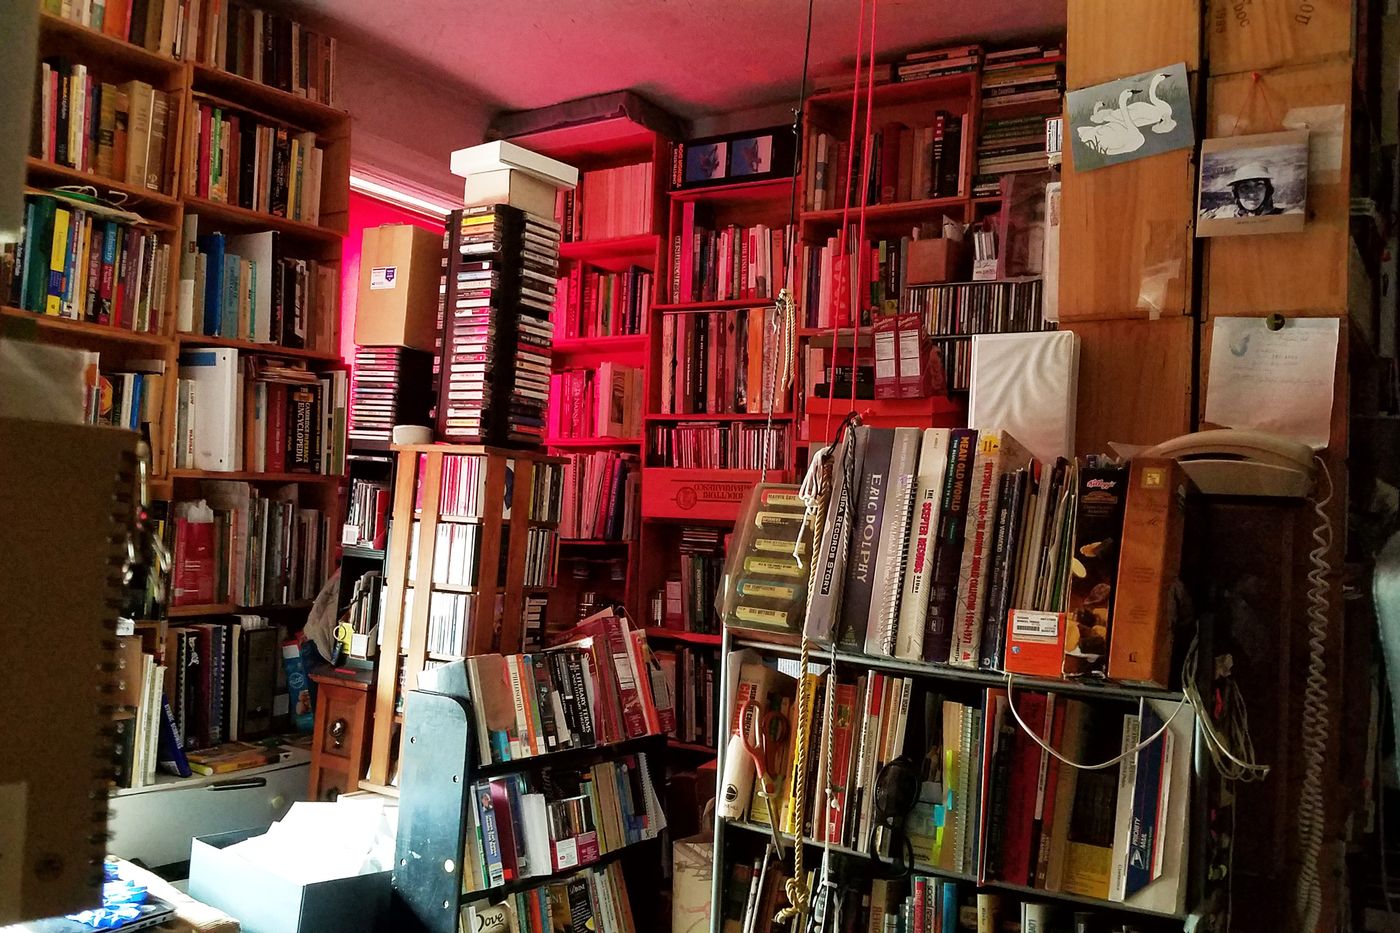 Confusion Pops Up, in a Pop-Up Bookstore